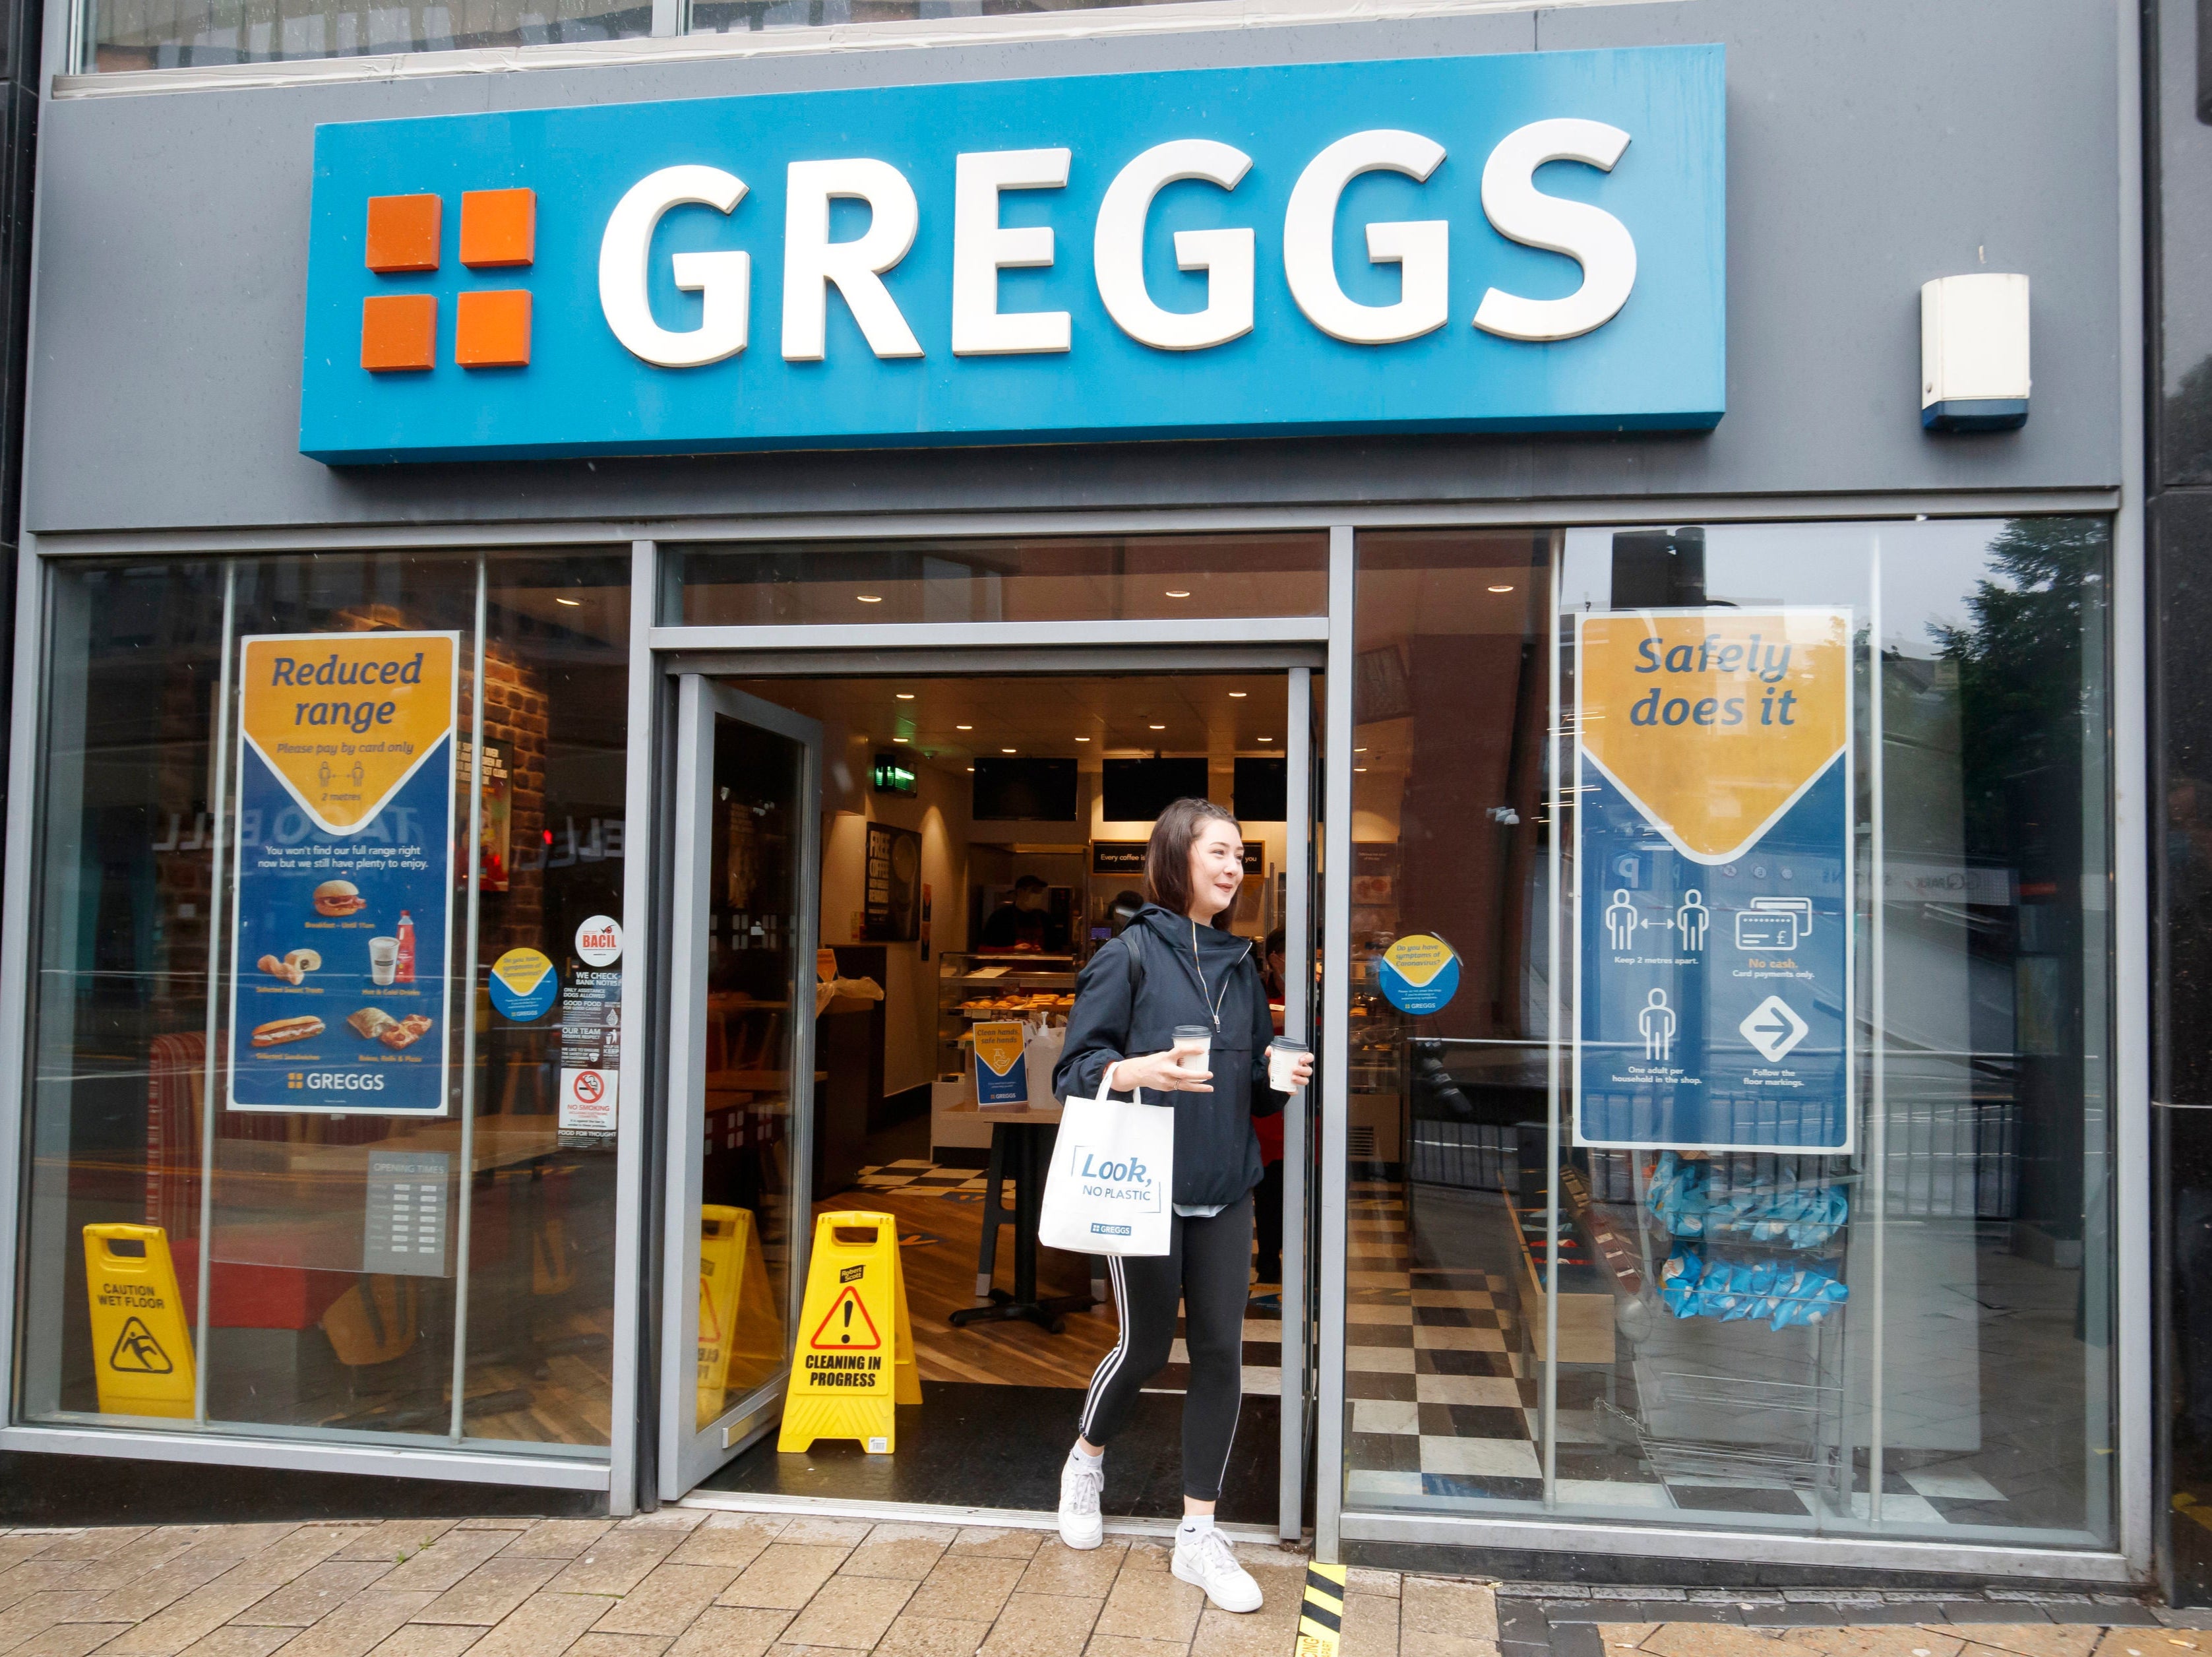 Greggs currently has around 2,100 shops and hopes to open 100 more before 2022.